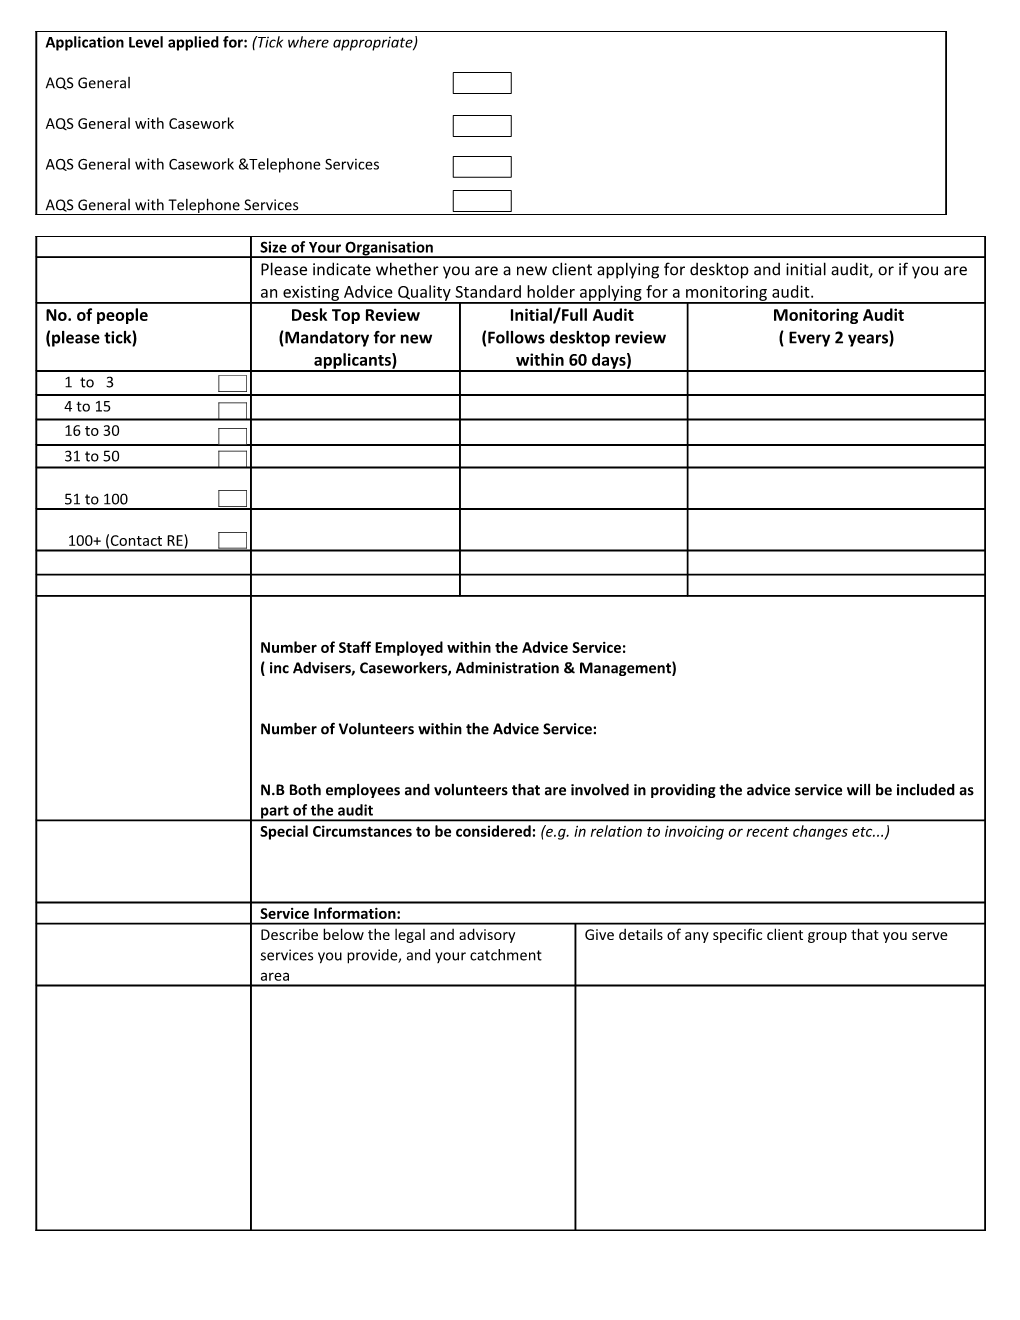 Application Form for the Advice Quality Standard (AQS)